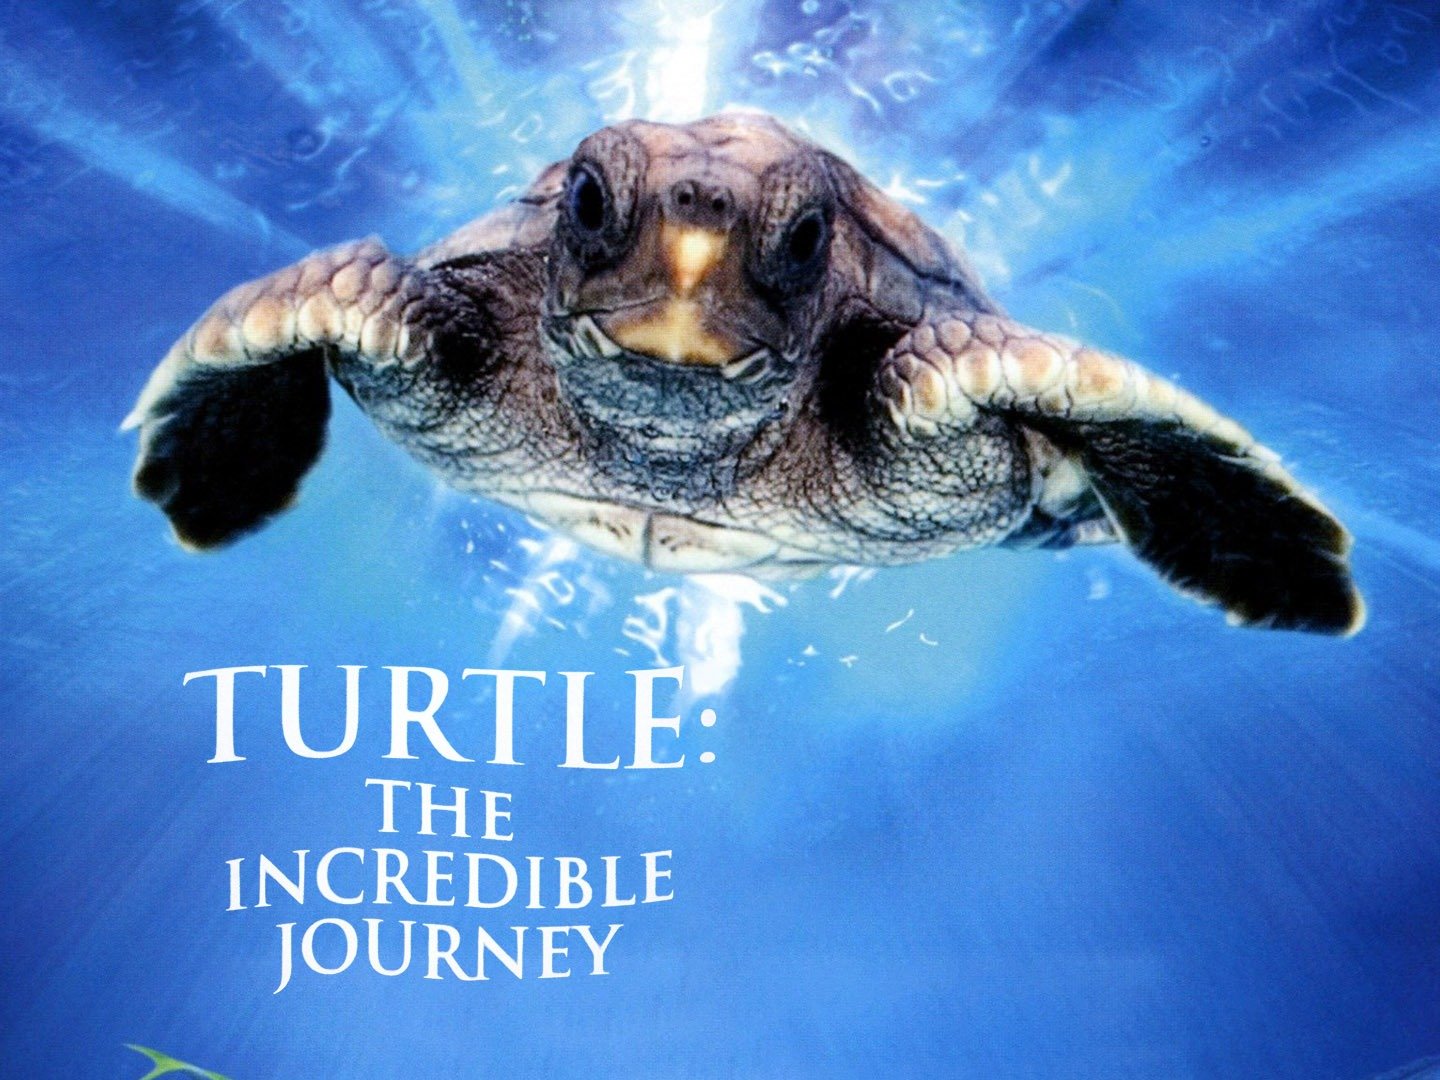 turtle the incredible journey full movie